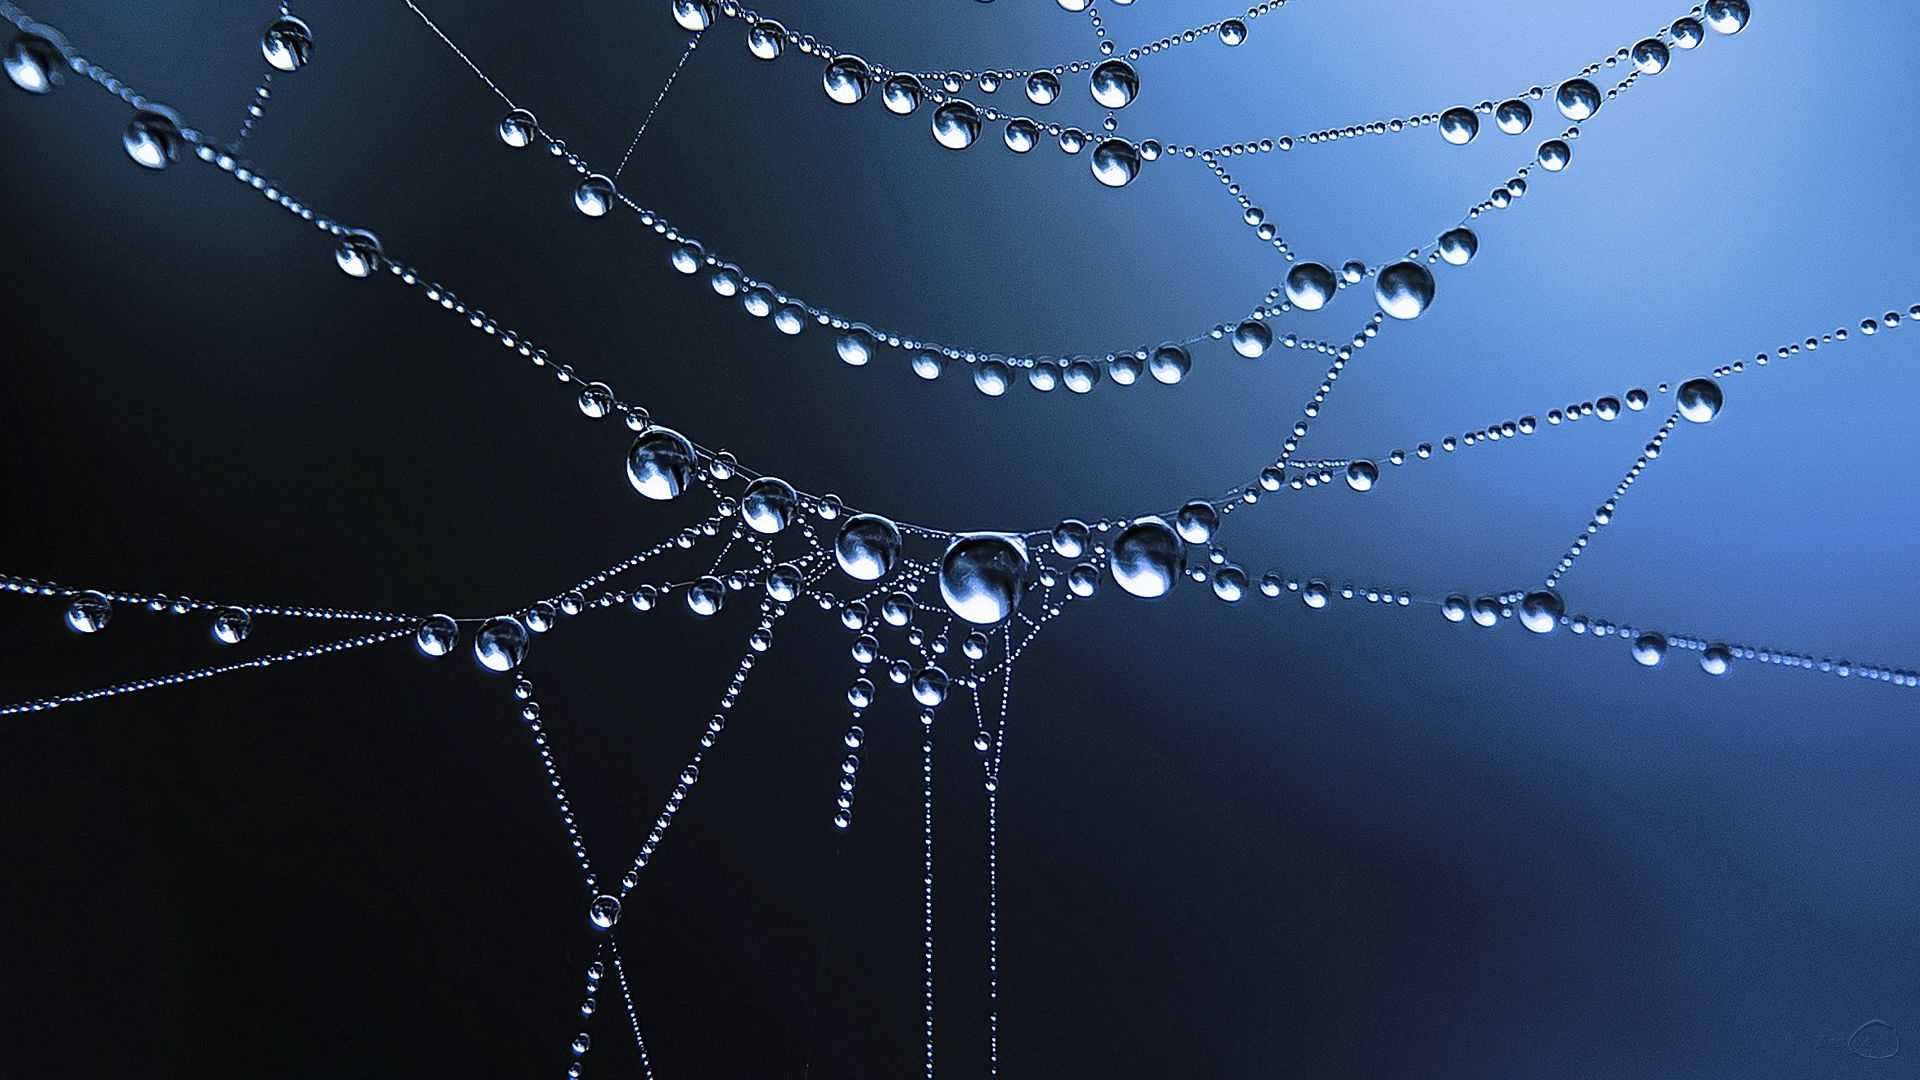 Water Drops High Resolution Drop Wallpaper For Mobile HD Image